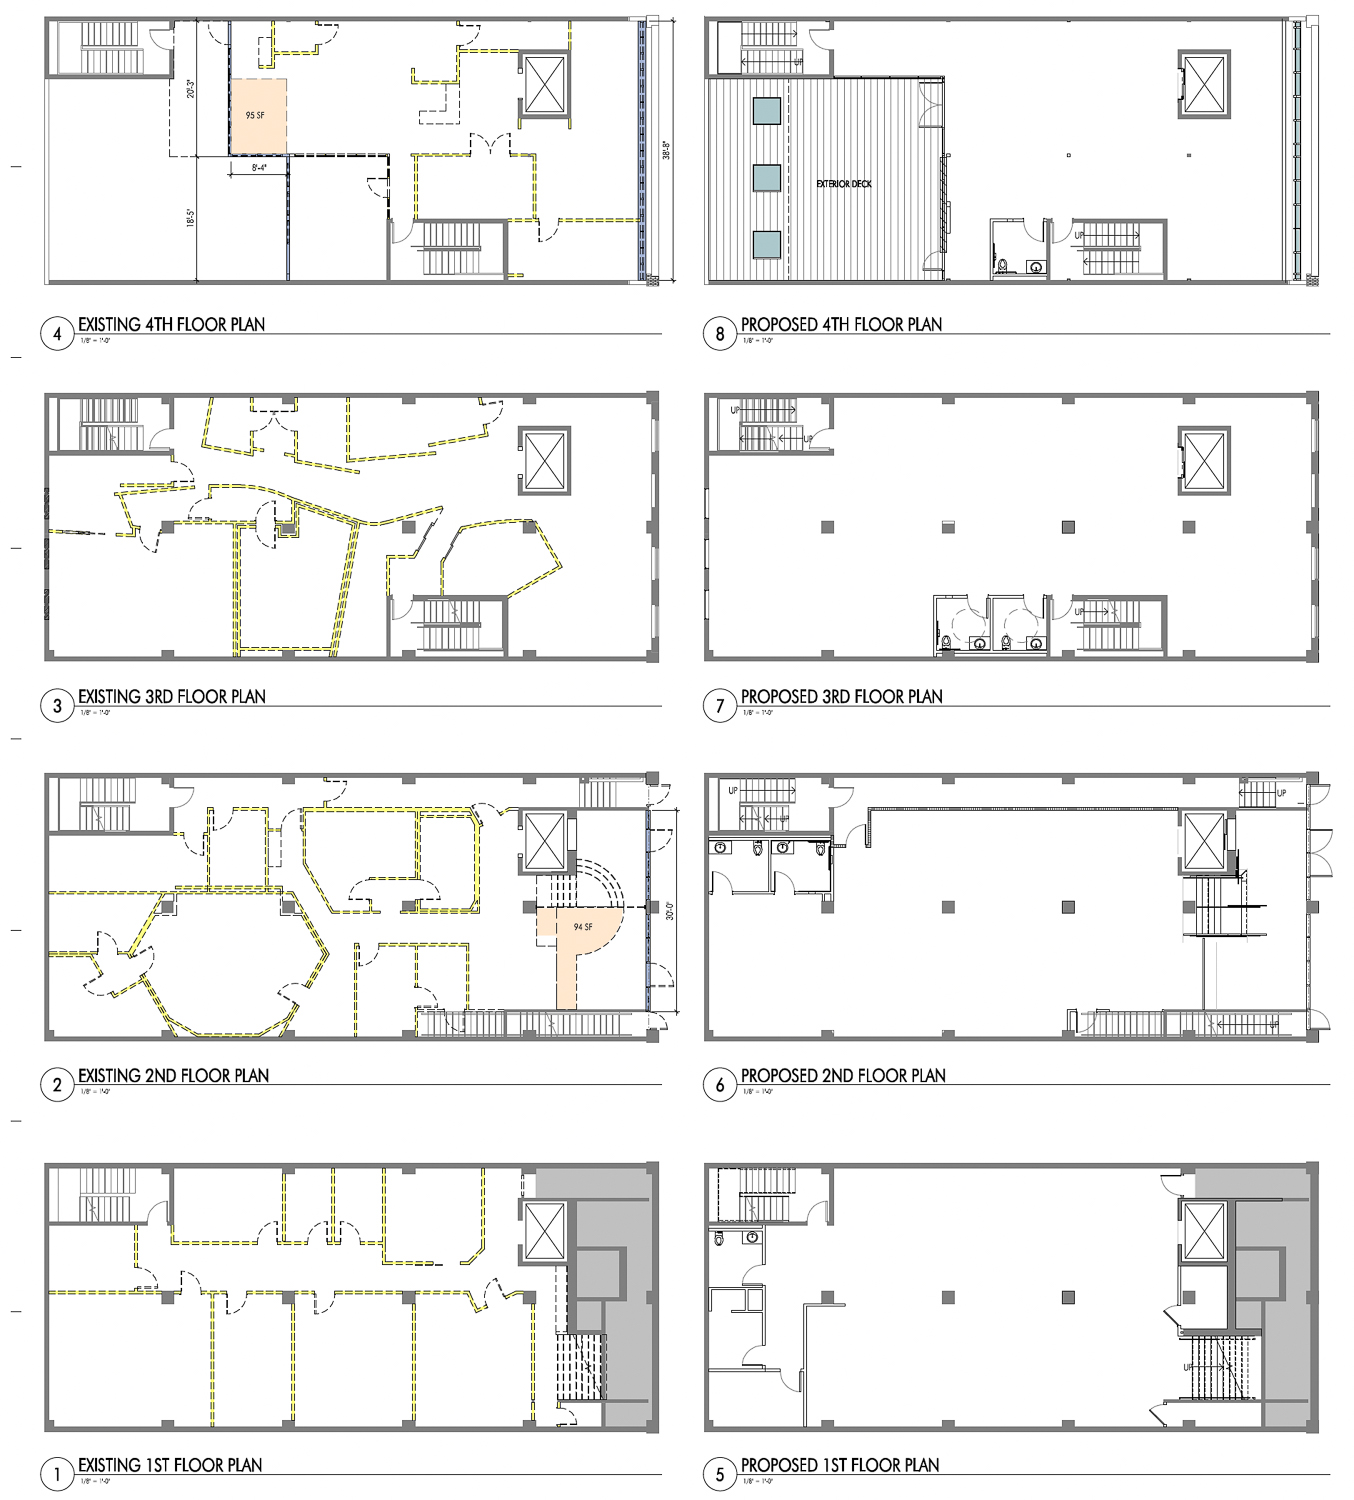 69 Green Street existing floor plans (right) and proposed floor plans (left), illustration by FORGE